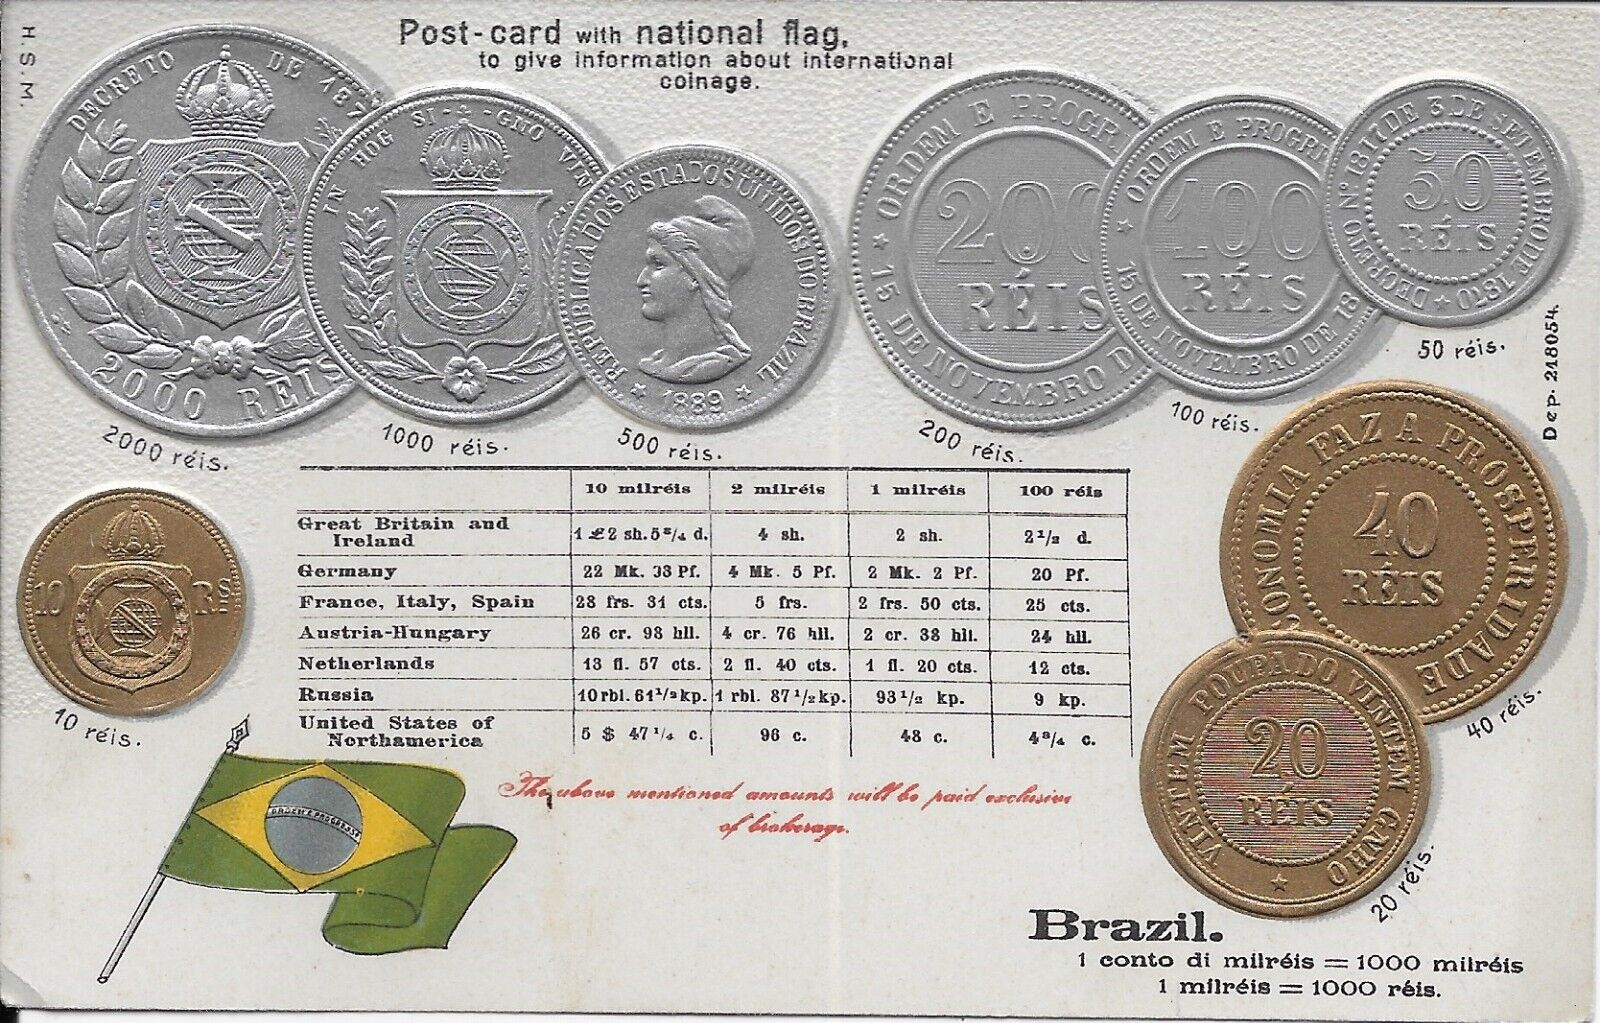 Brazil Embossed Vintage Coin and Flag Postcard not postally used